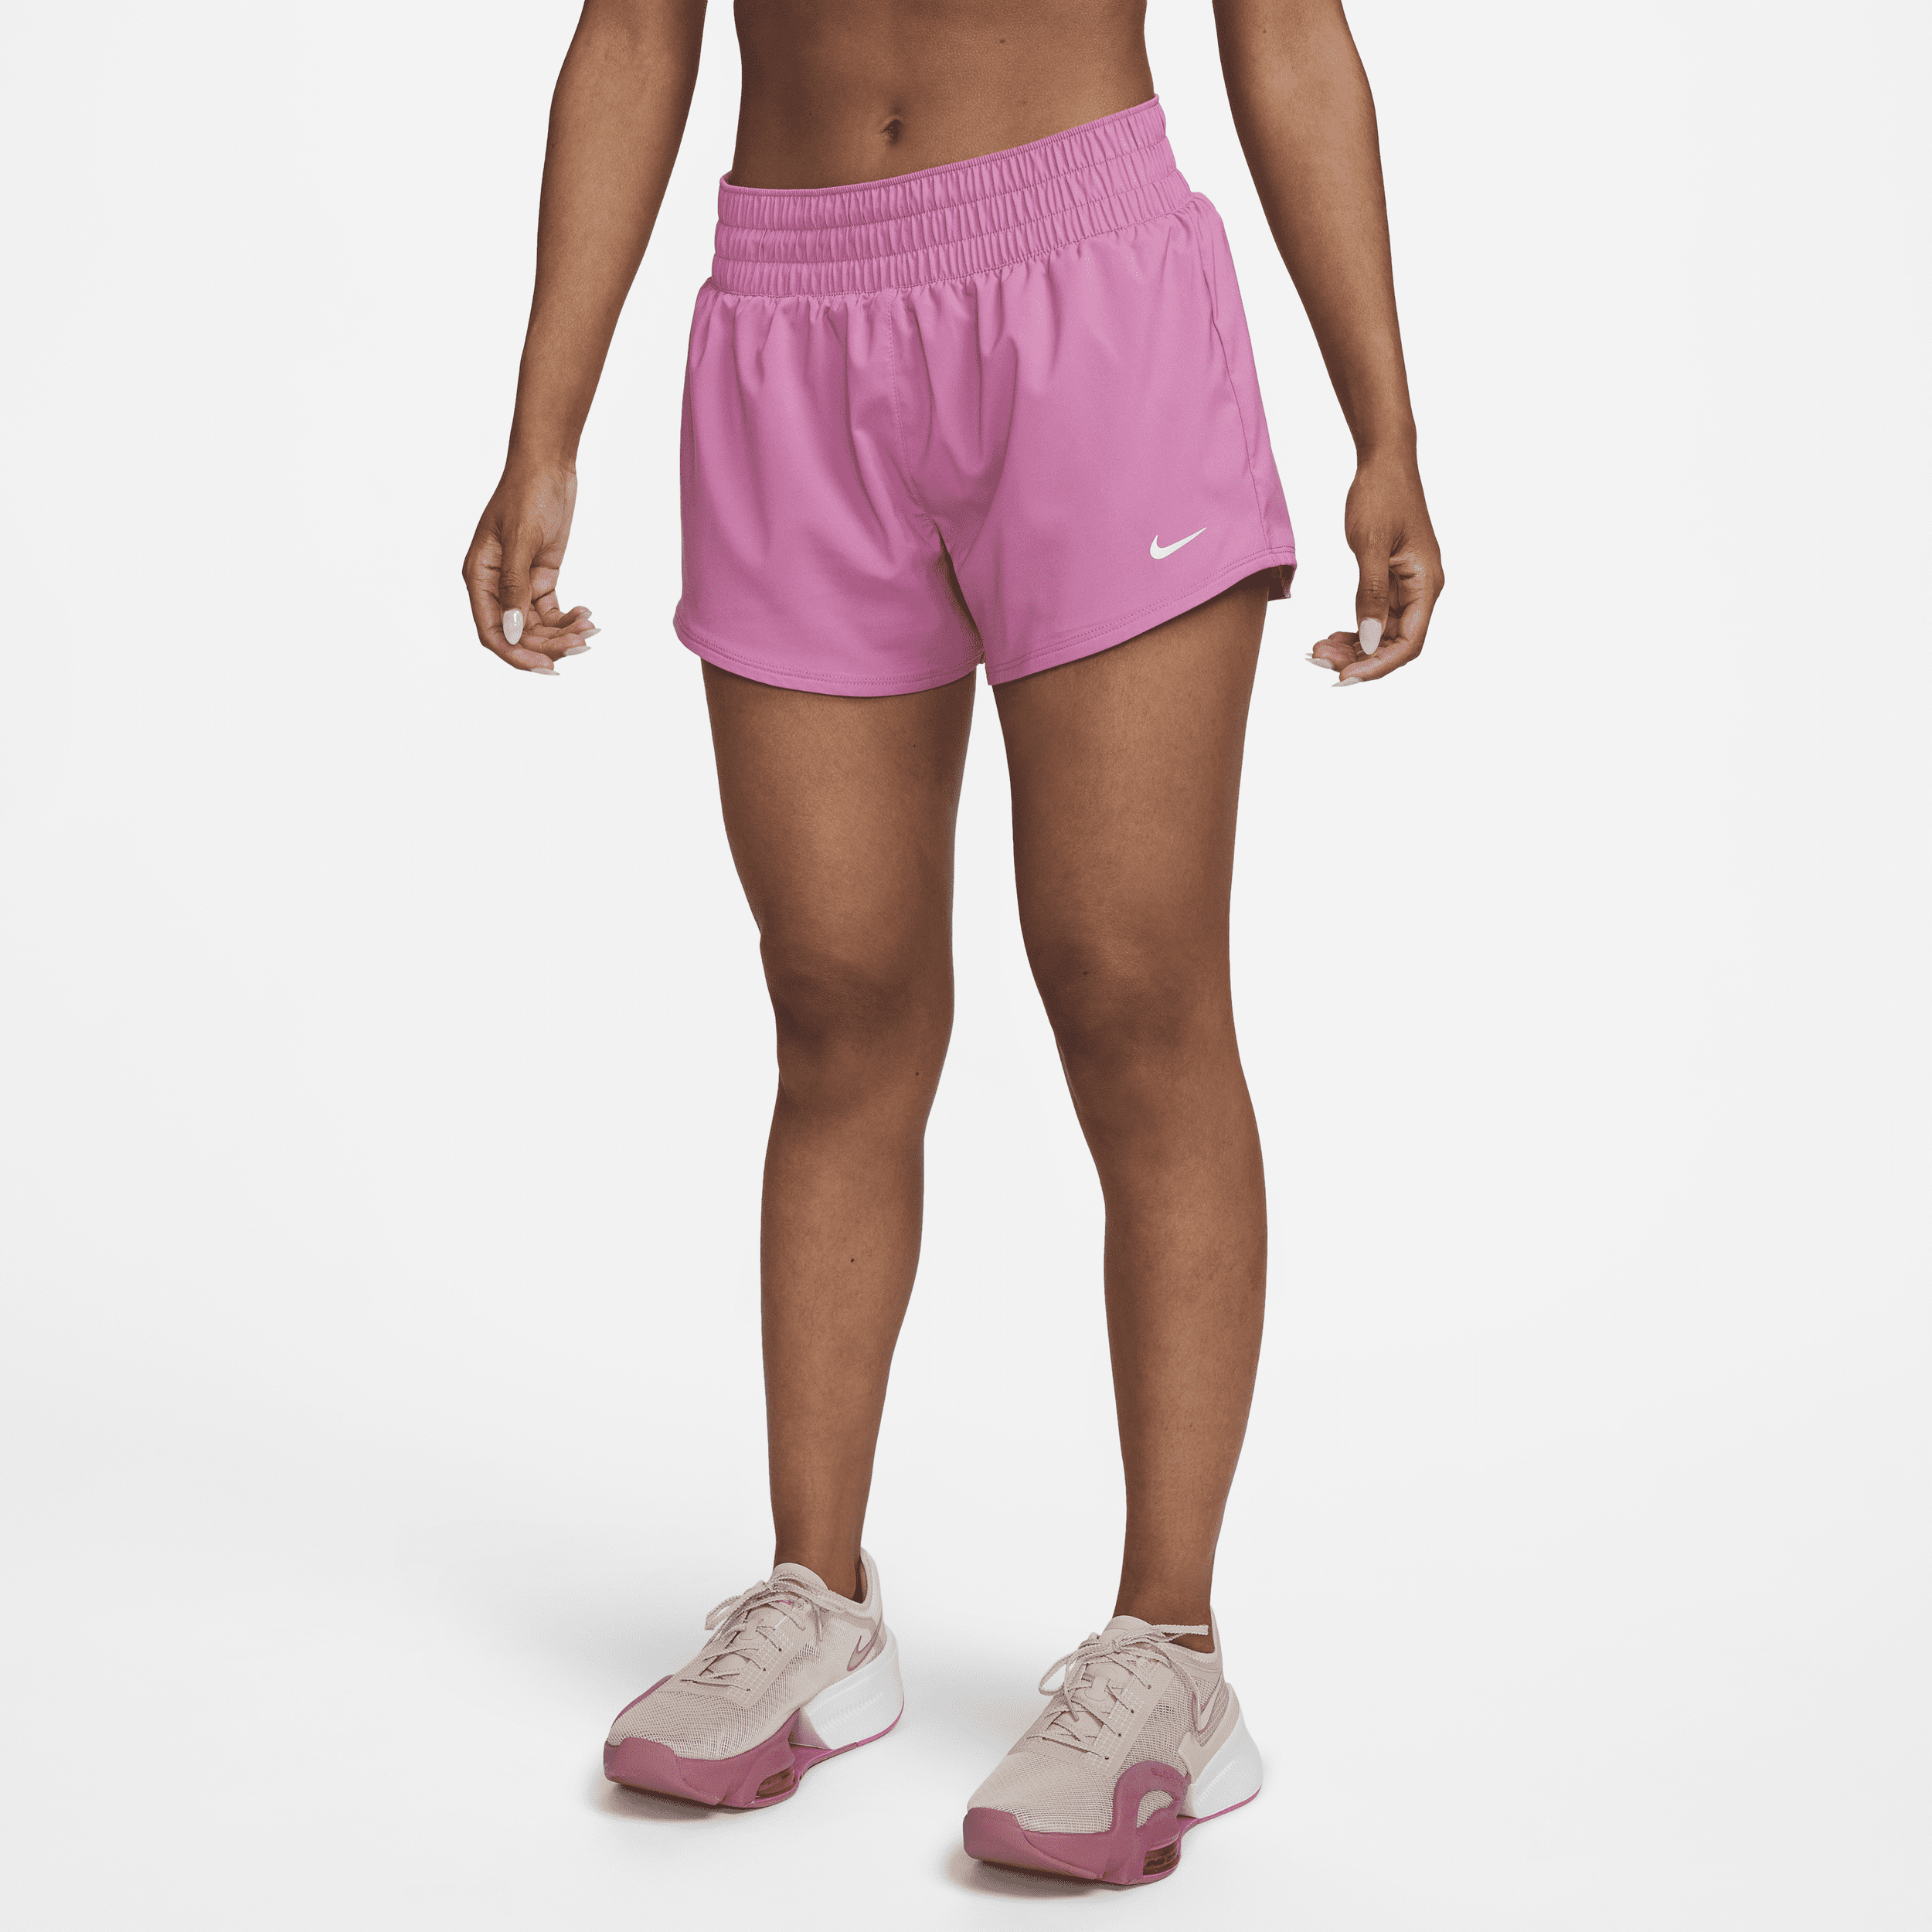 NIKE WOMEN'S ONE DRI-FIT MID-RISE 3" BRIEF-LINED SHORTS,1008061469